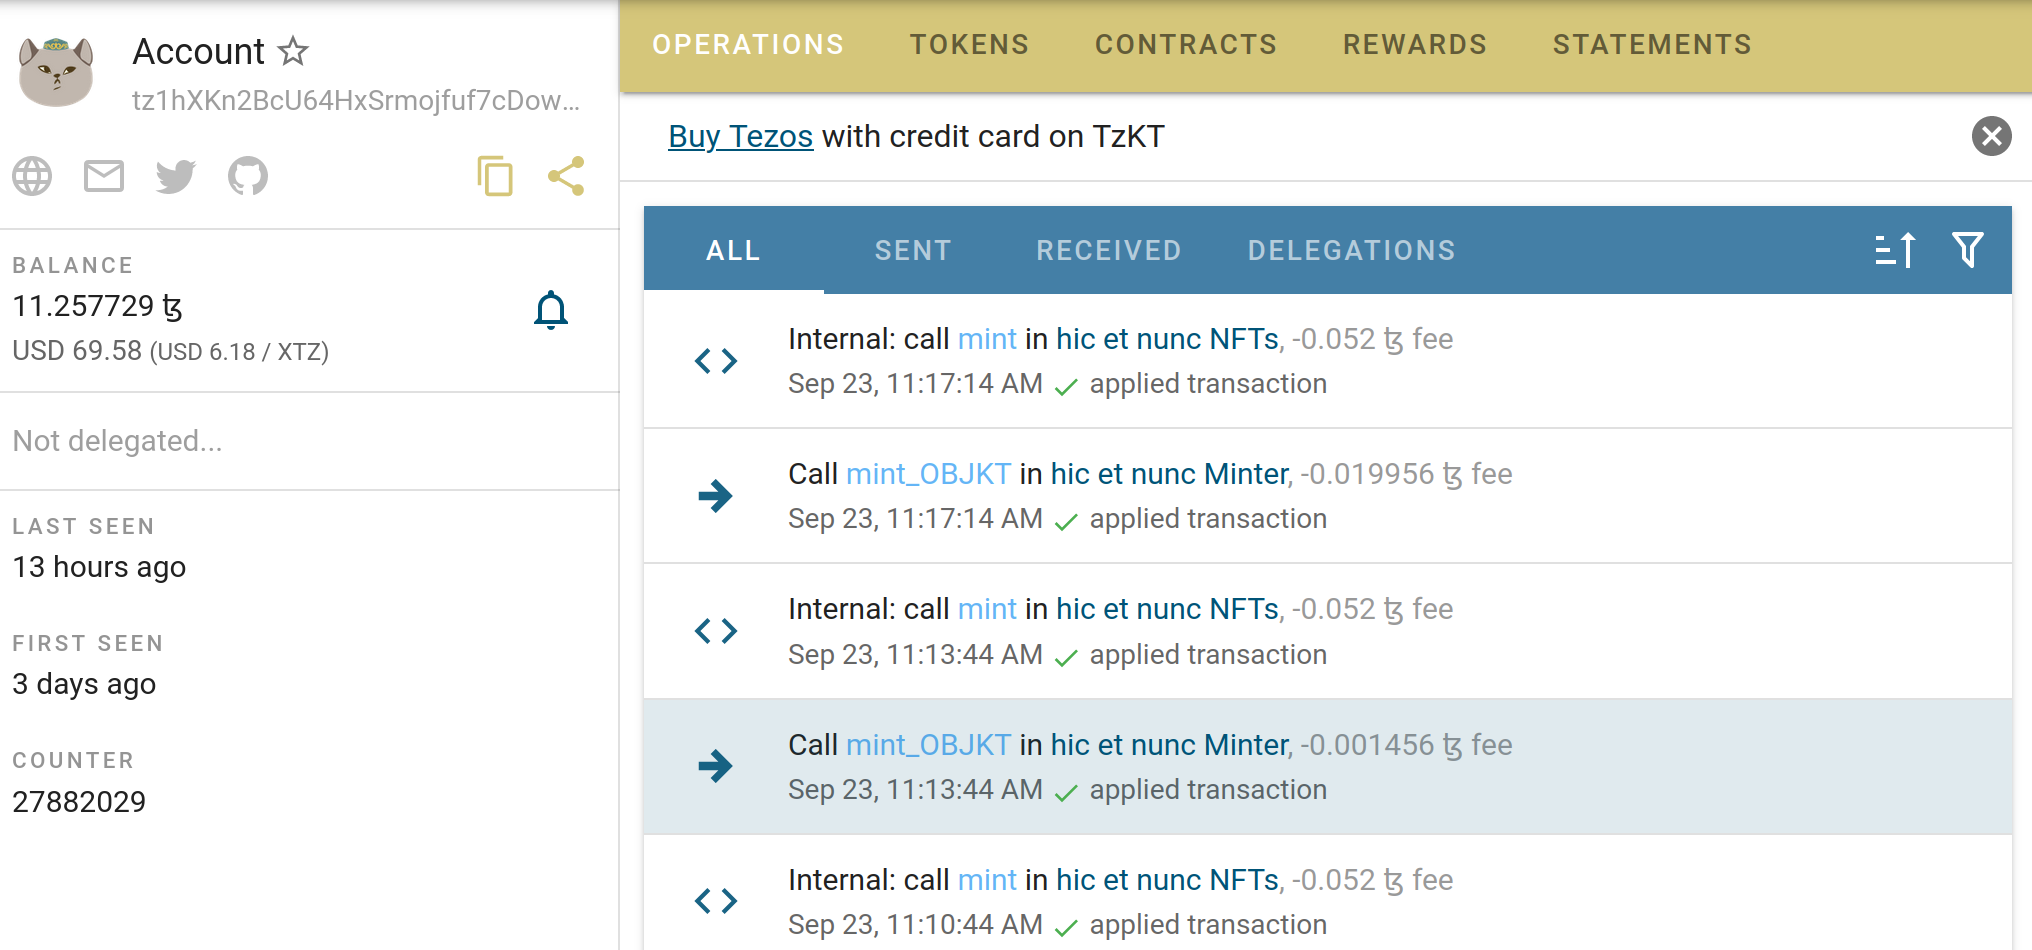 The Hic et Nunc NFT marketplace: Our Guide To Clean NFTs on Tezos